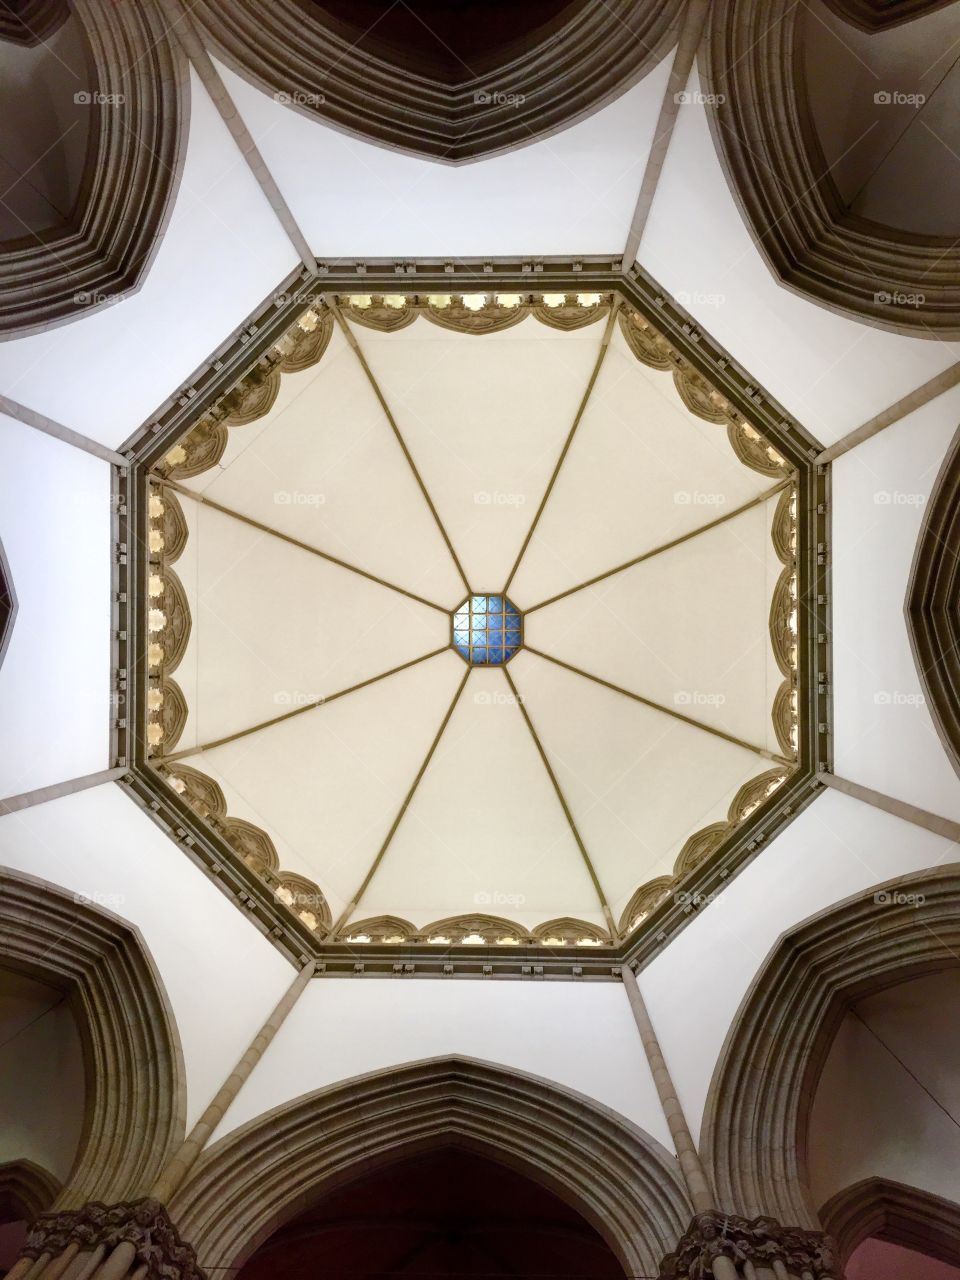 Roof of a church